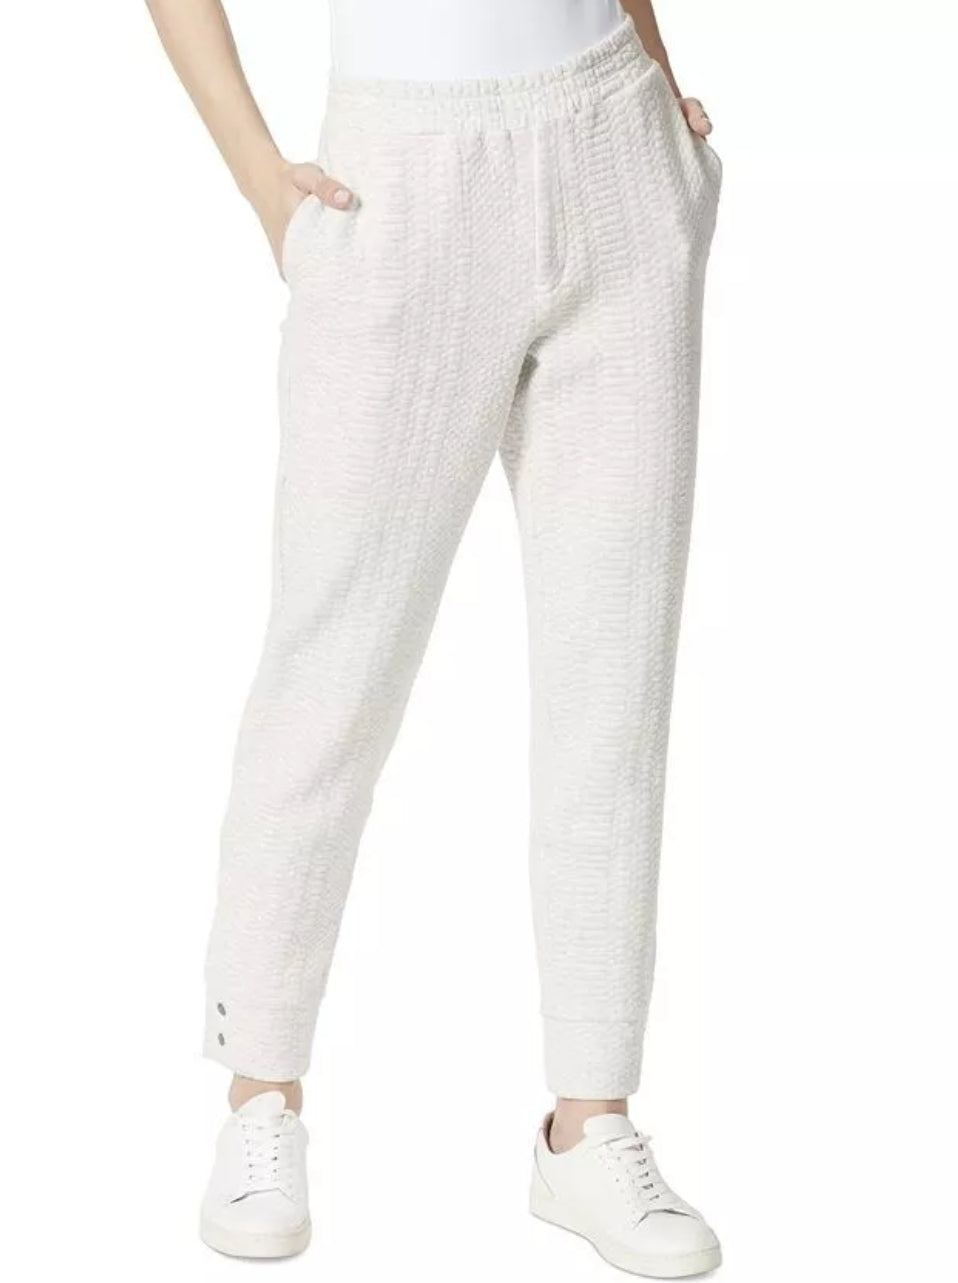 Frayed Denim Women's Natalia Buttoned Cuff Textured Sweatpants White Size X-Large XL Dresses by Brands Overstock | Brands Overstock